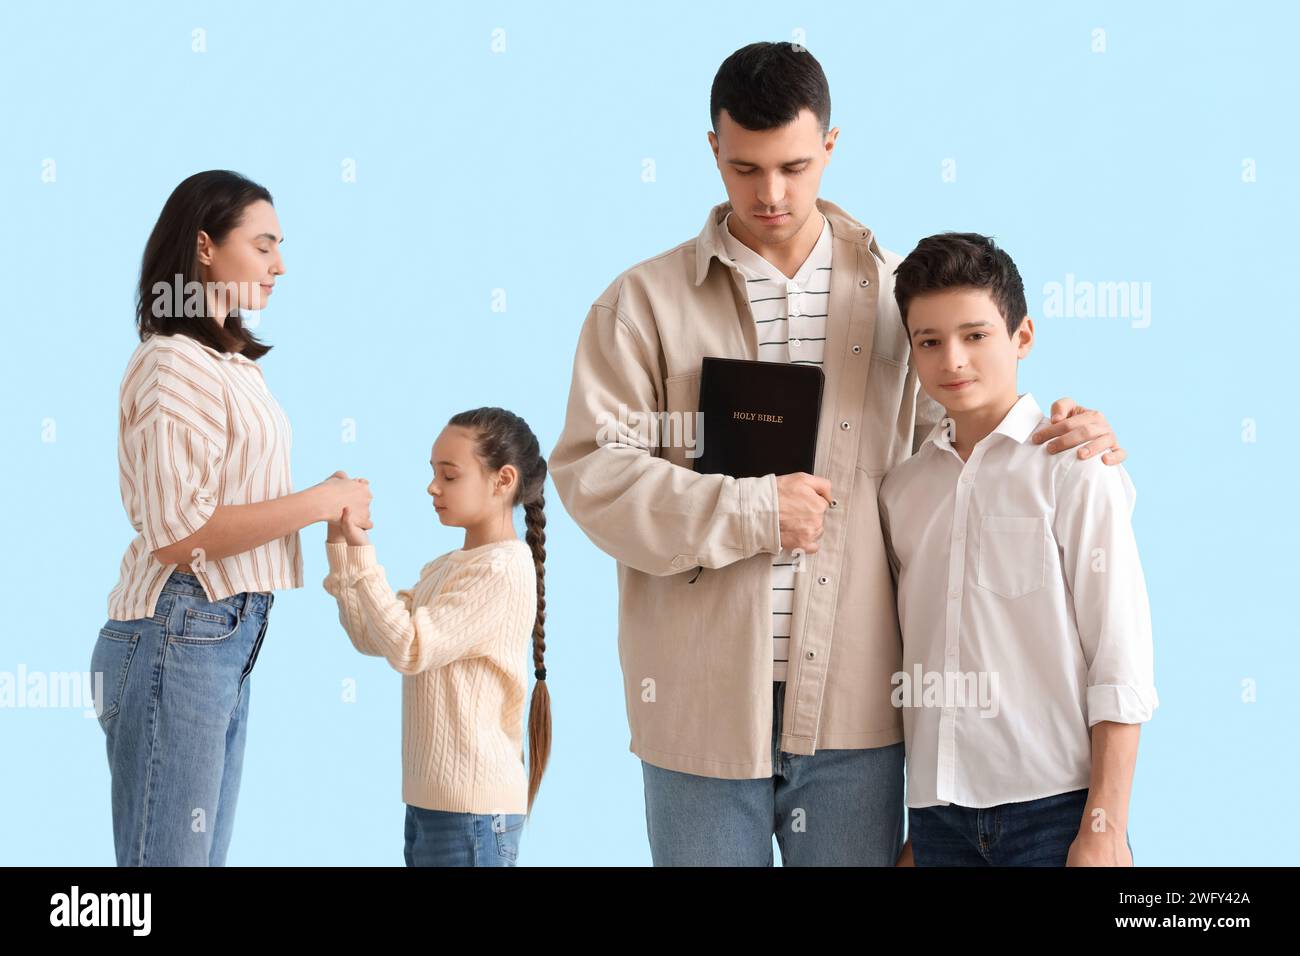 Family with Holy Bible praying together on blue background Stock Photo